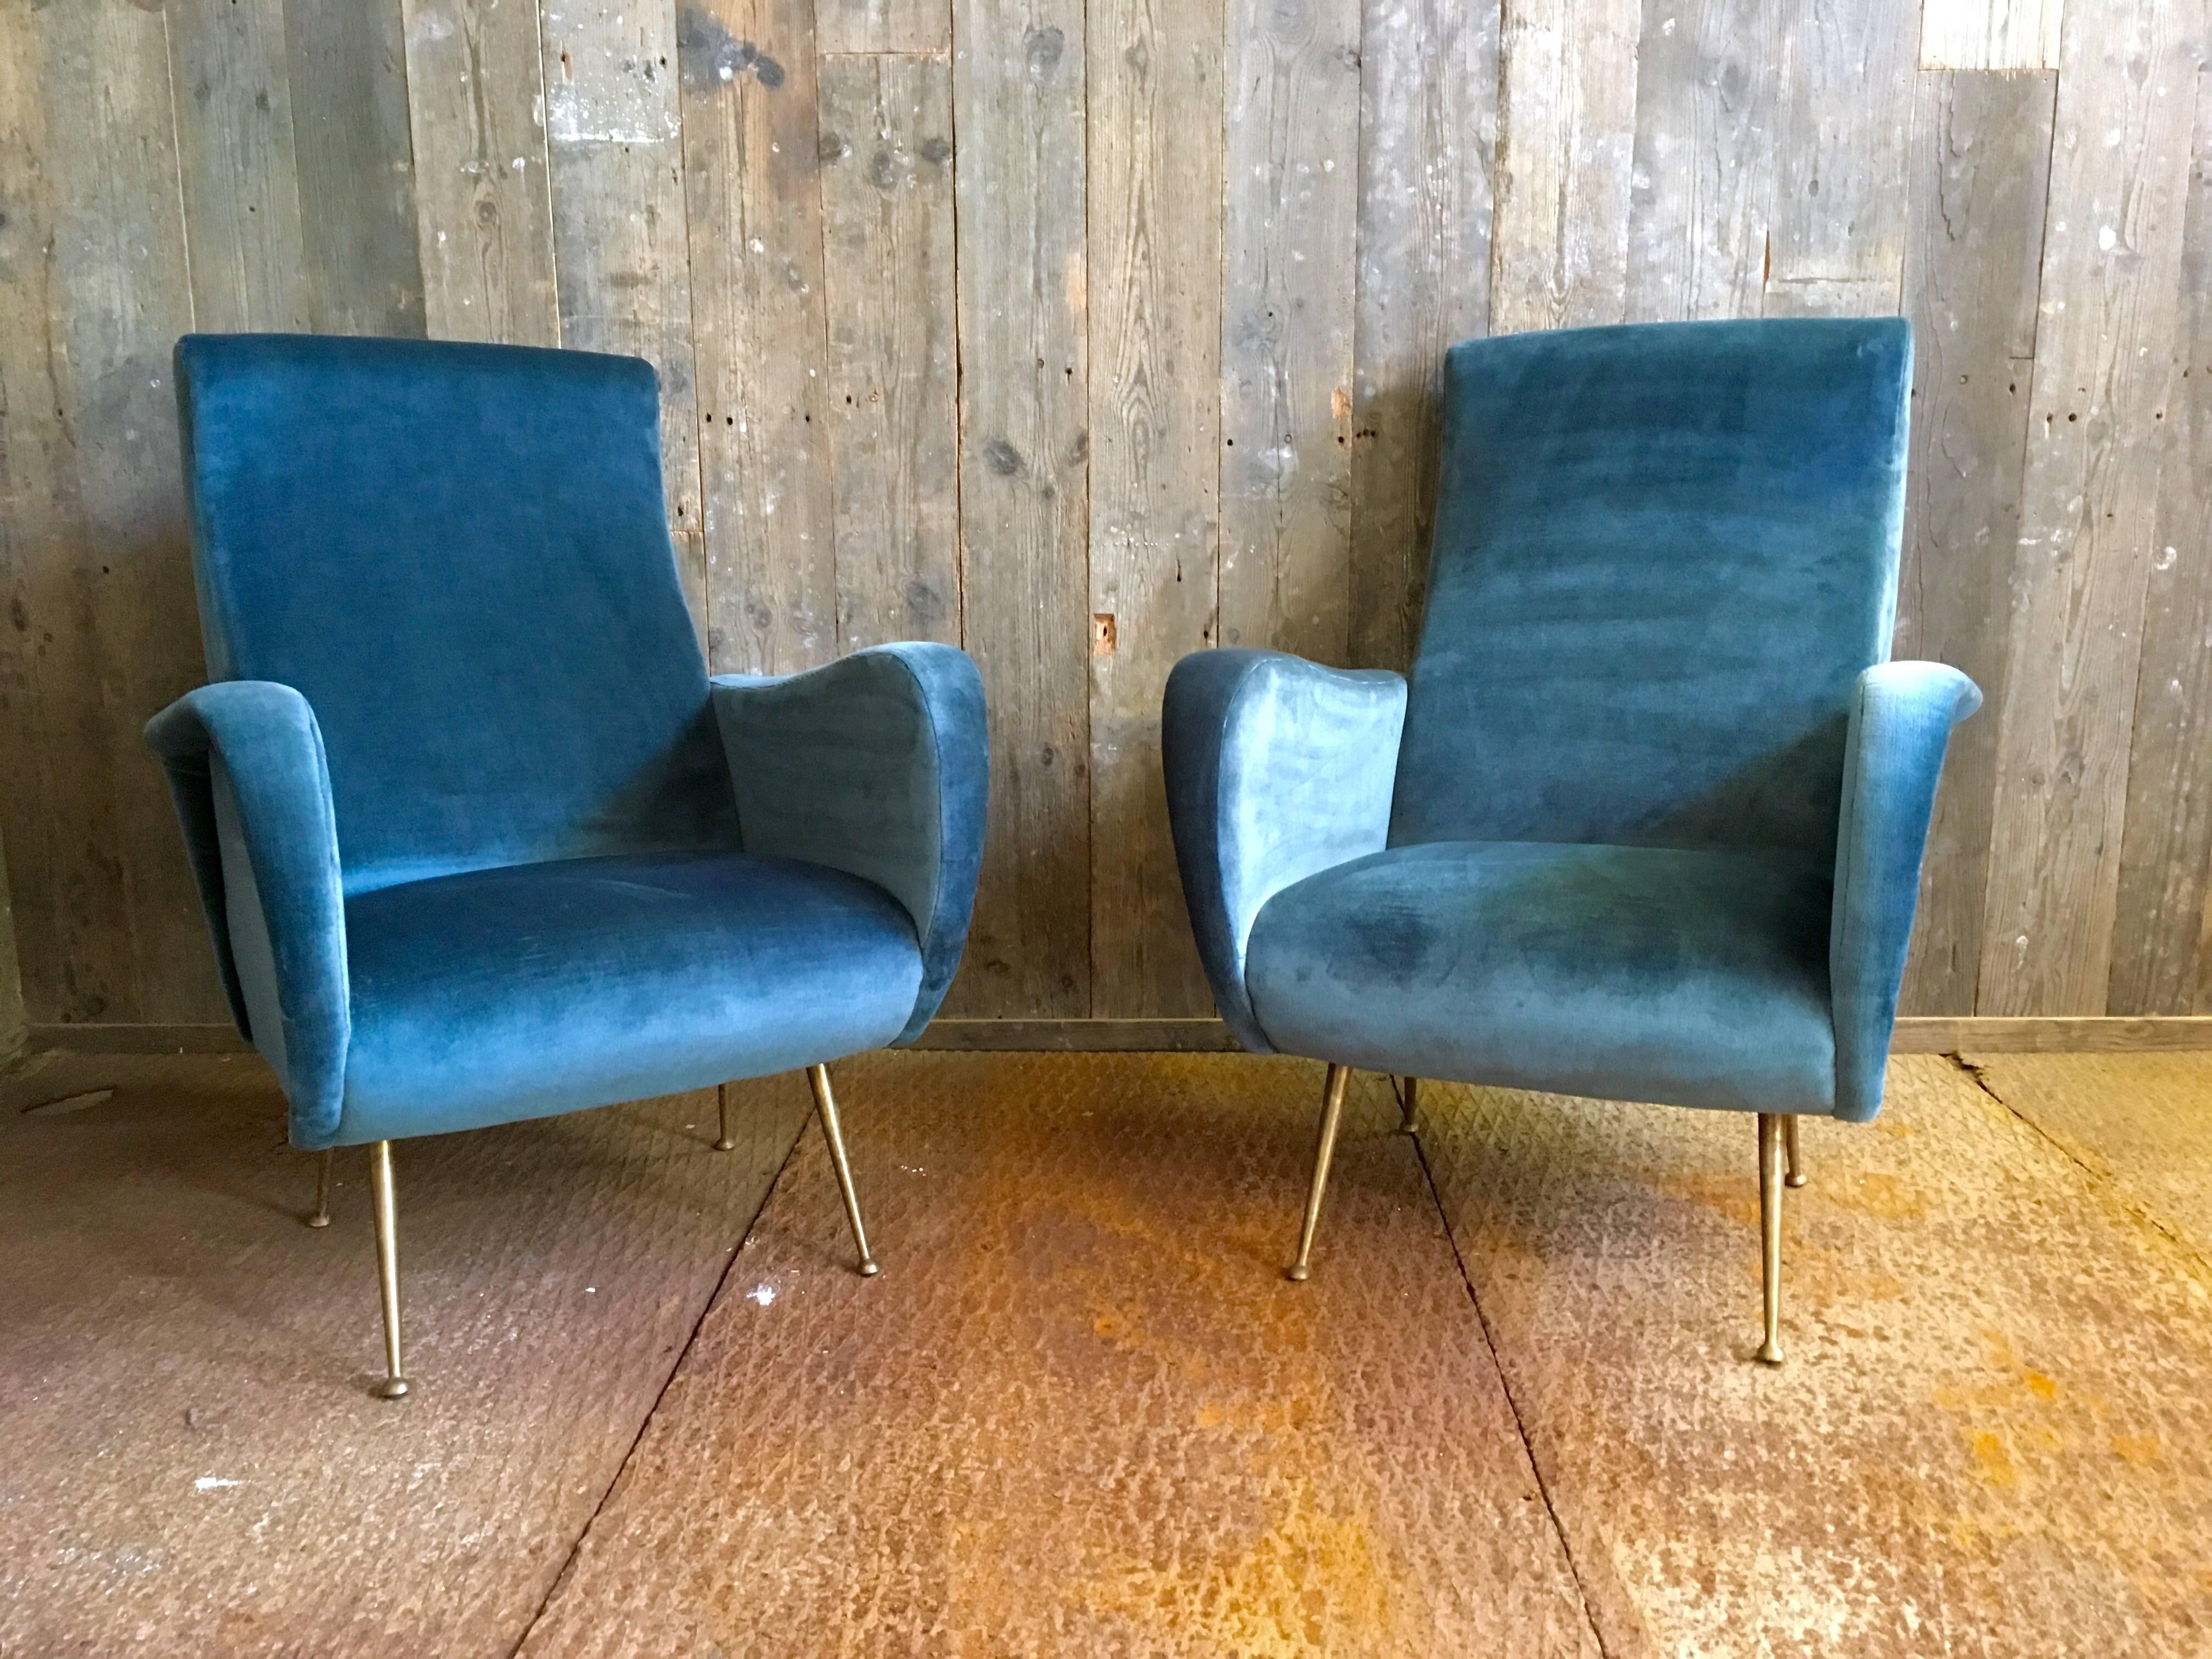 Two lady chairs by Marco Zanuso in beautiful petrol blue velvet.

Marco Zanuso (1916-2001) was a famous Italian designer who had a major influence on the world of design. Nowadays his work can be found in the Museum of Modern Art in New York and